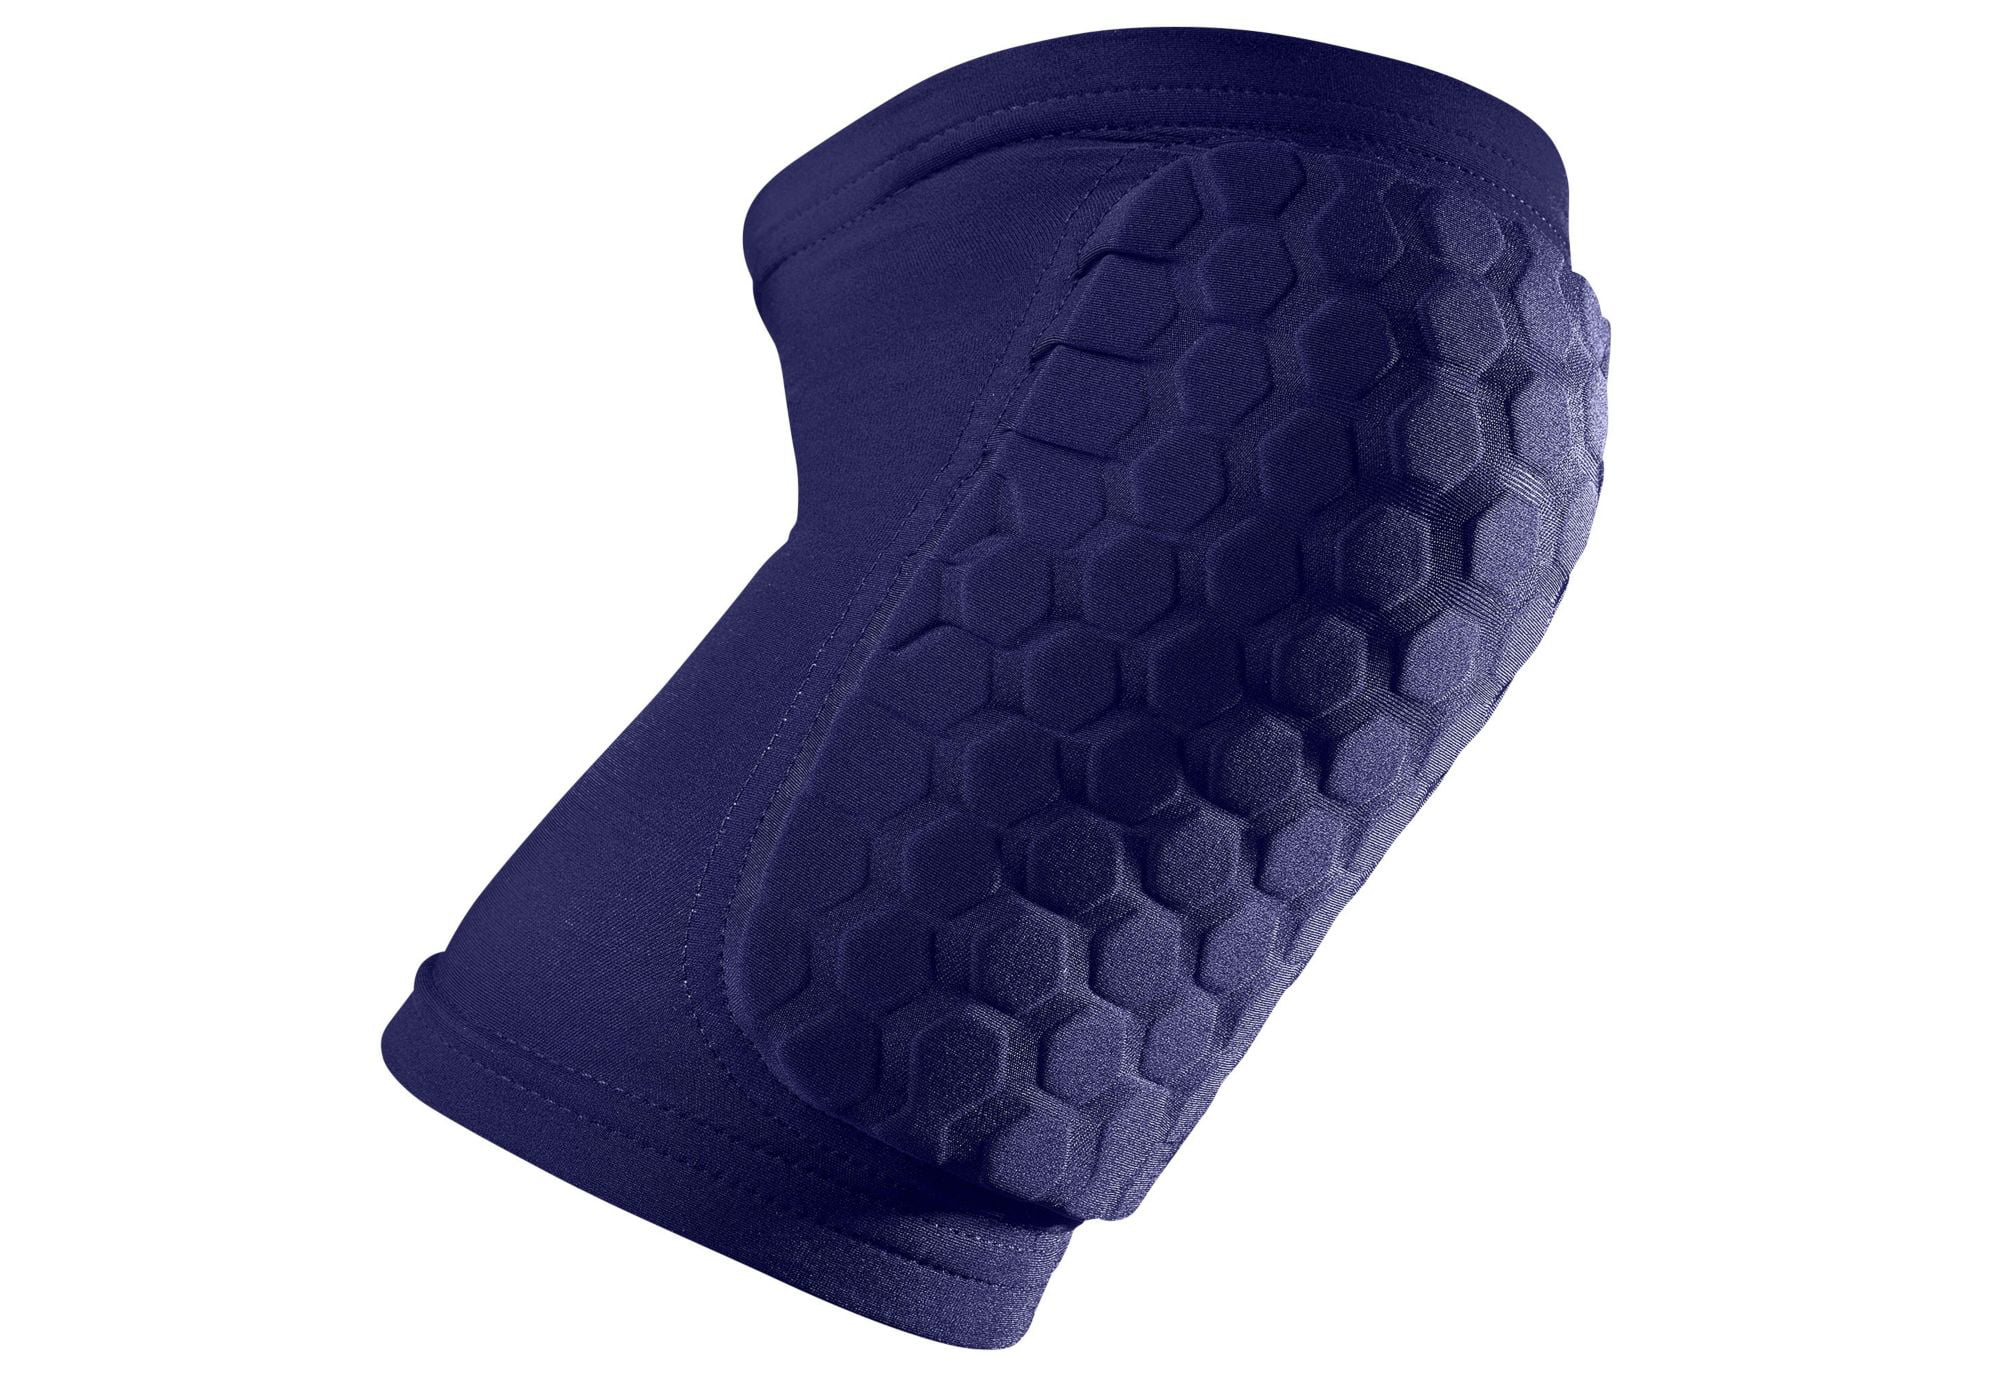 SOLD IN PAIRS MCDAVID CLASSIC 6440 NAVY BLUE HEXPAD KNEE SLEEVE PADDED 